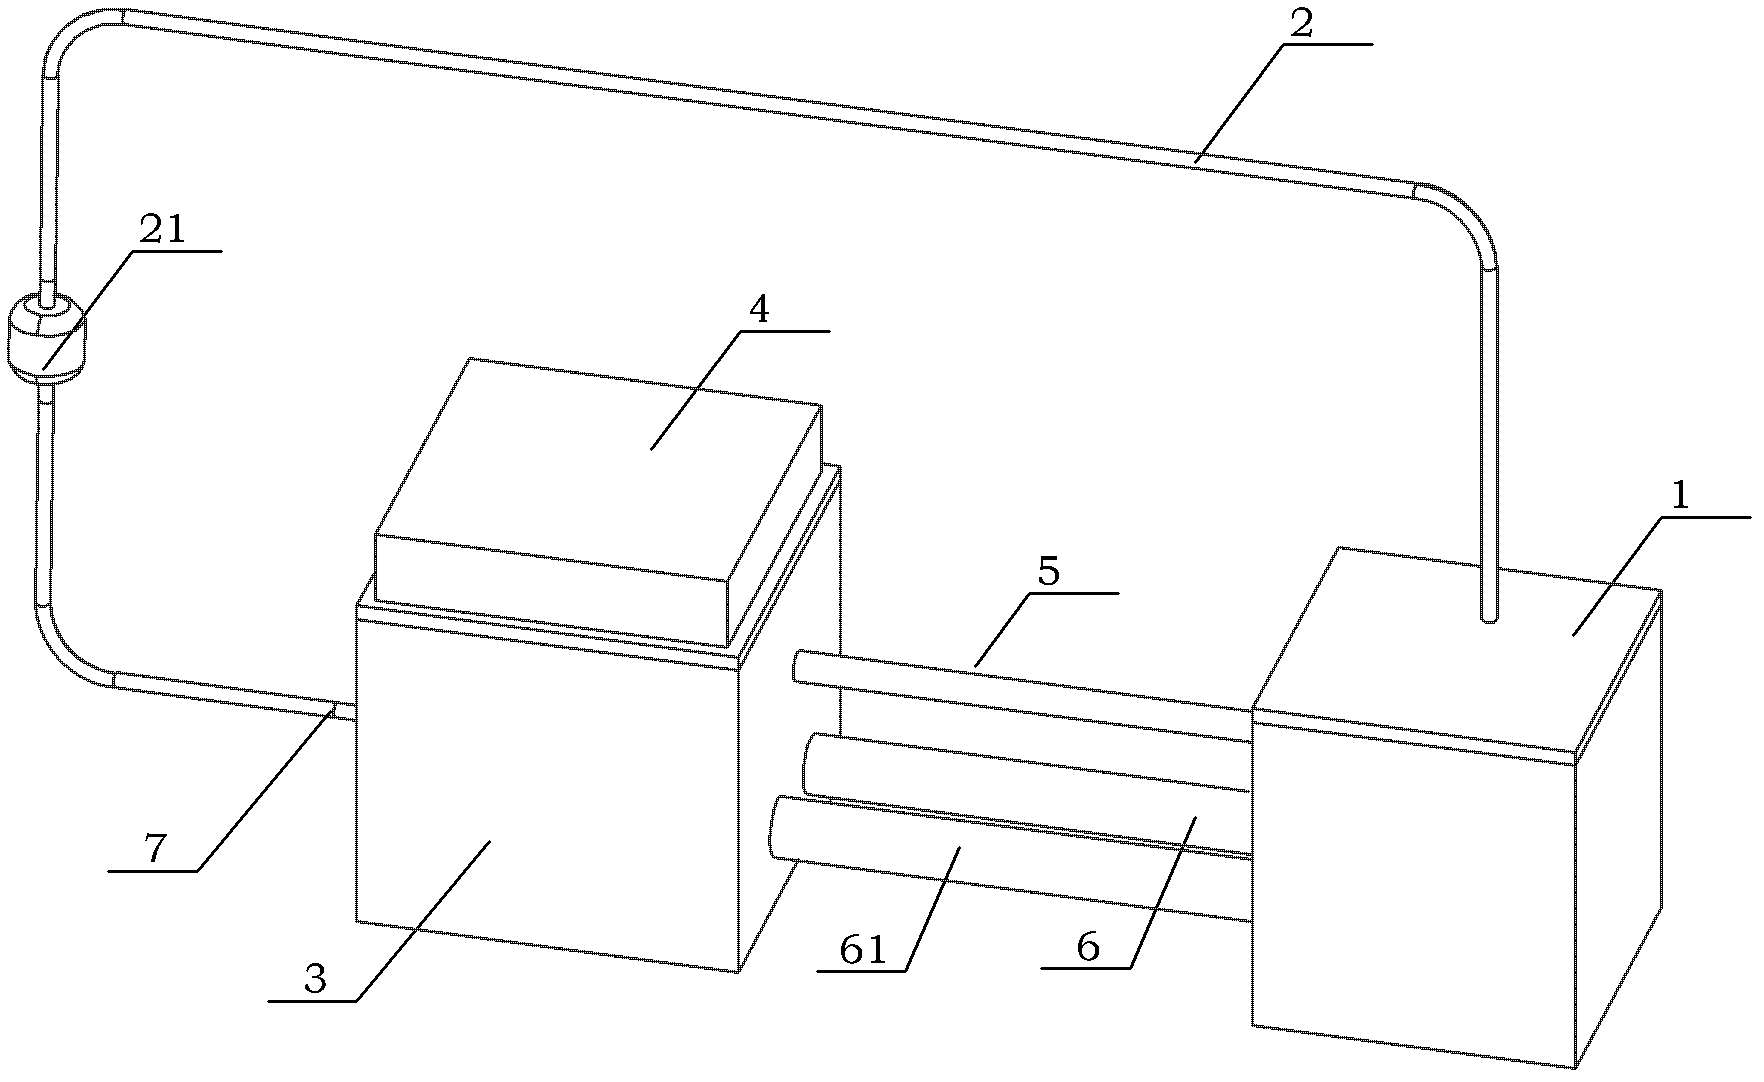 Microgravity environment-based spray cooling loop device